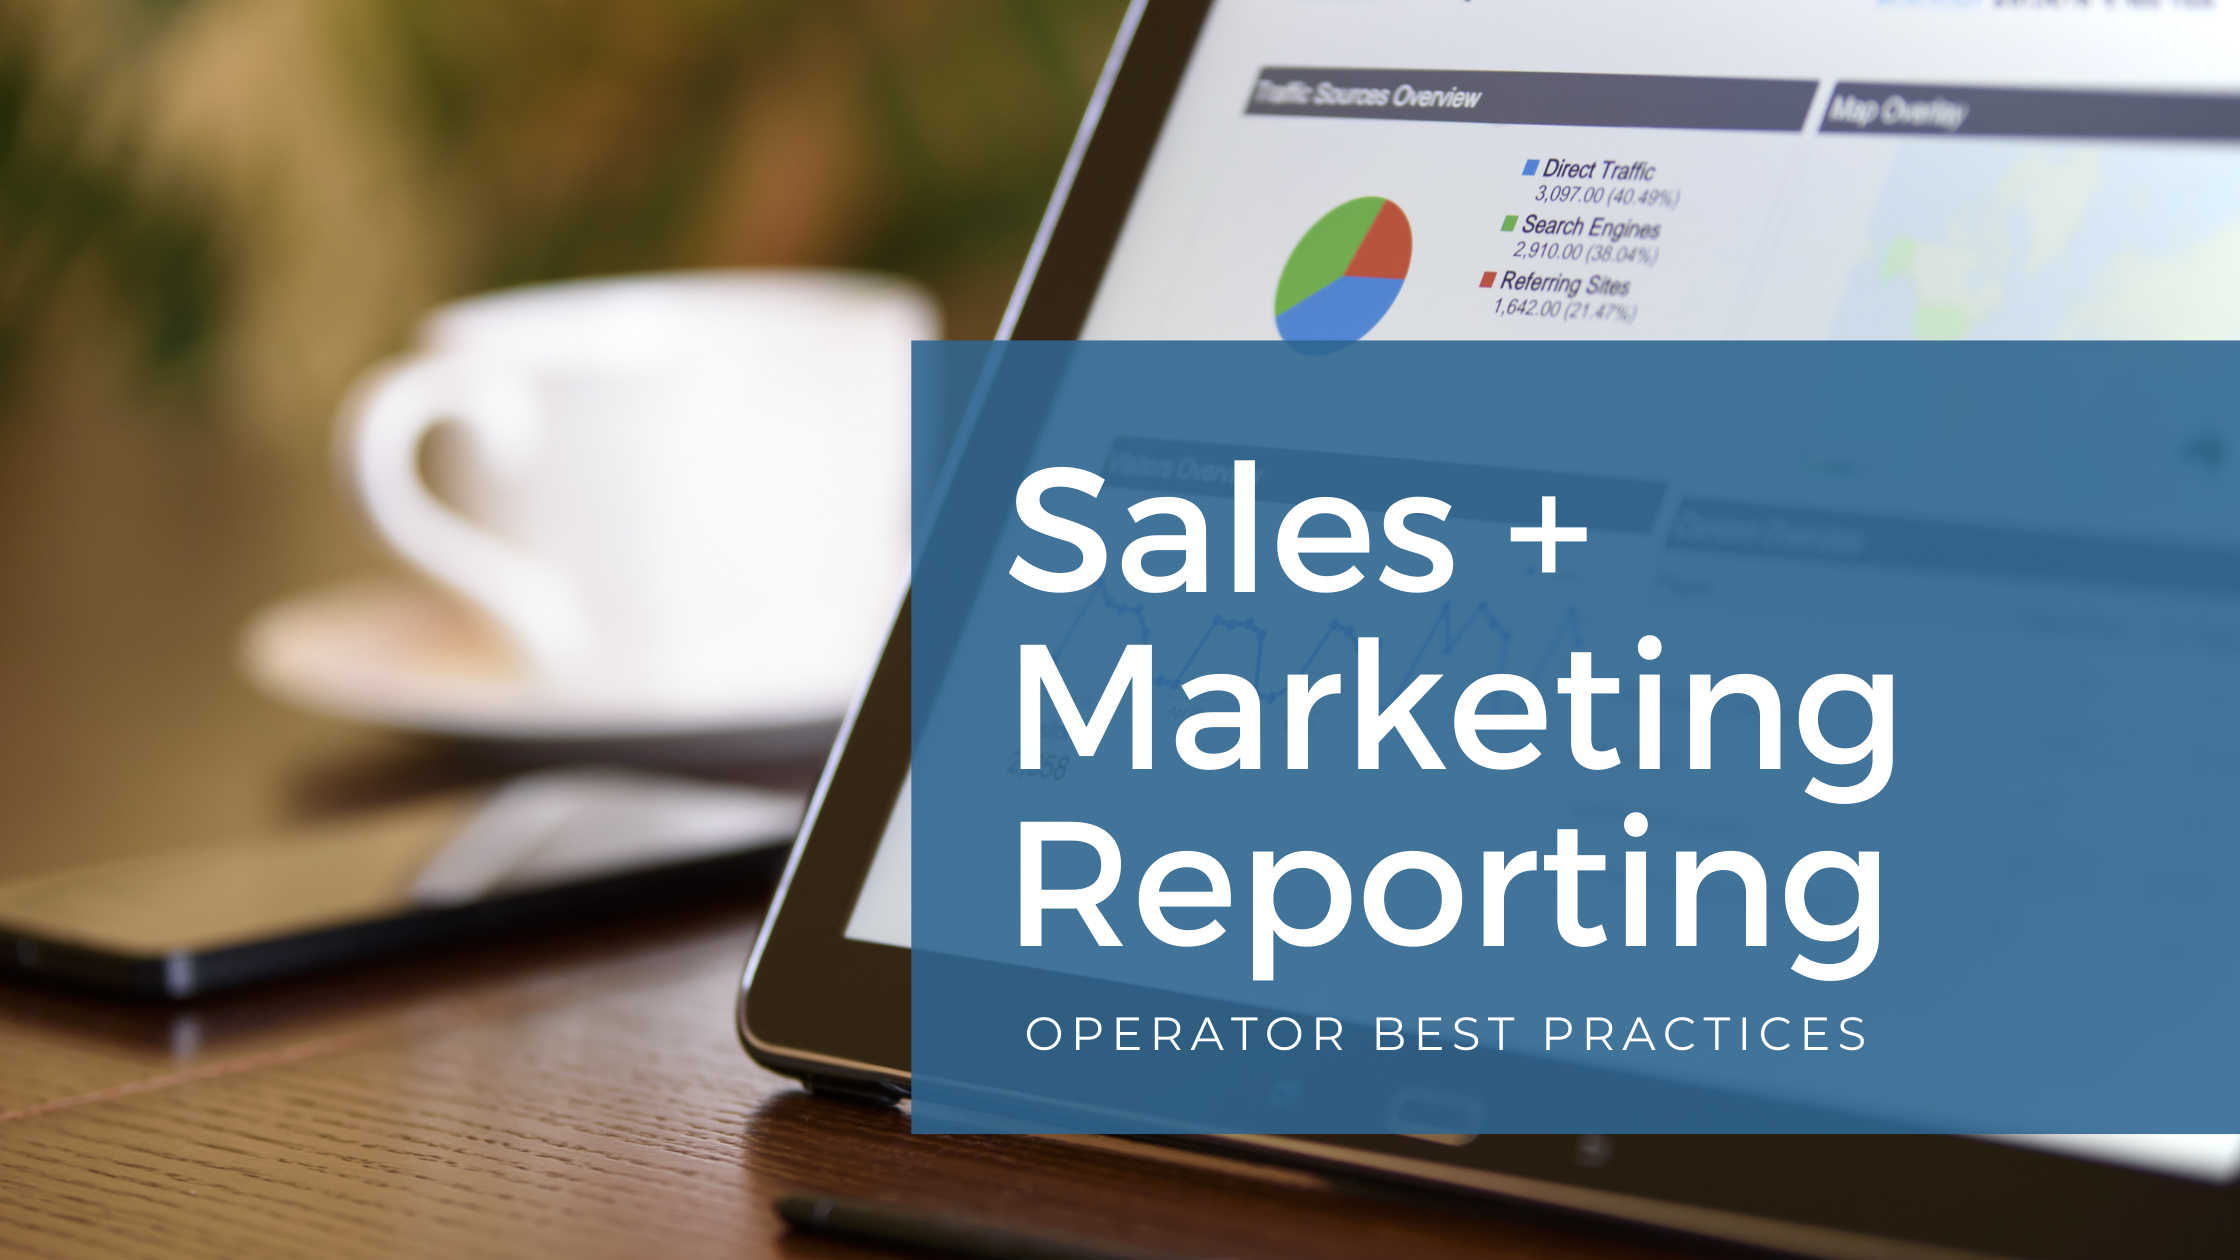 Sales and Marketing reporting